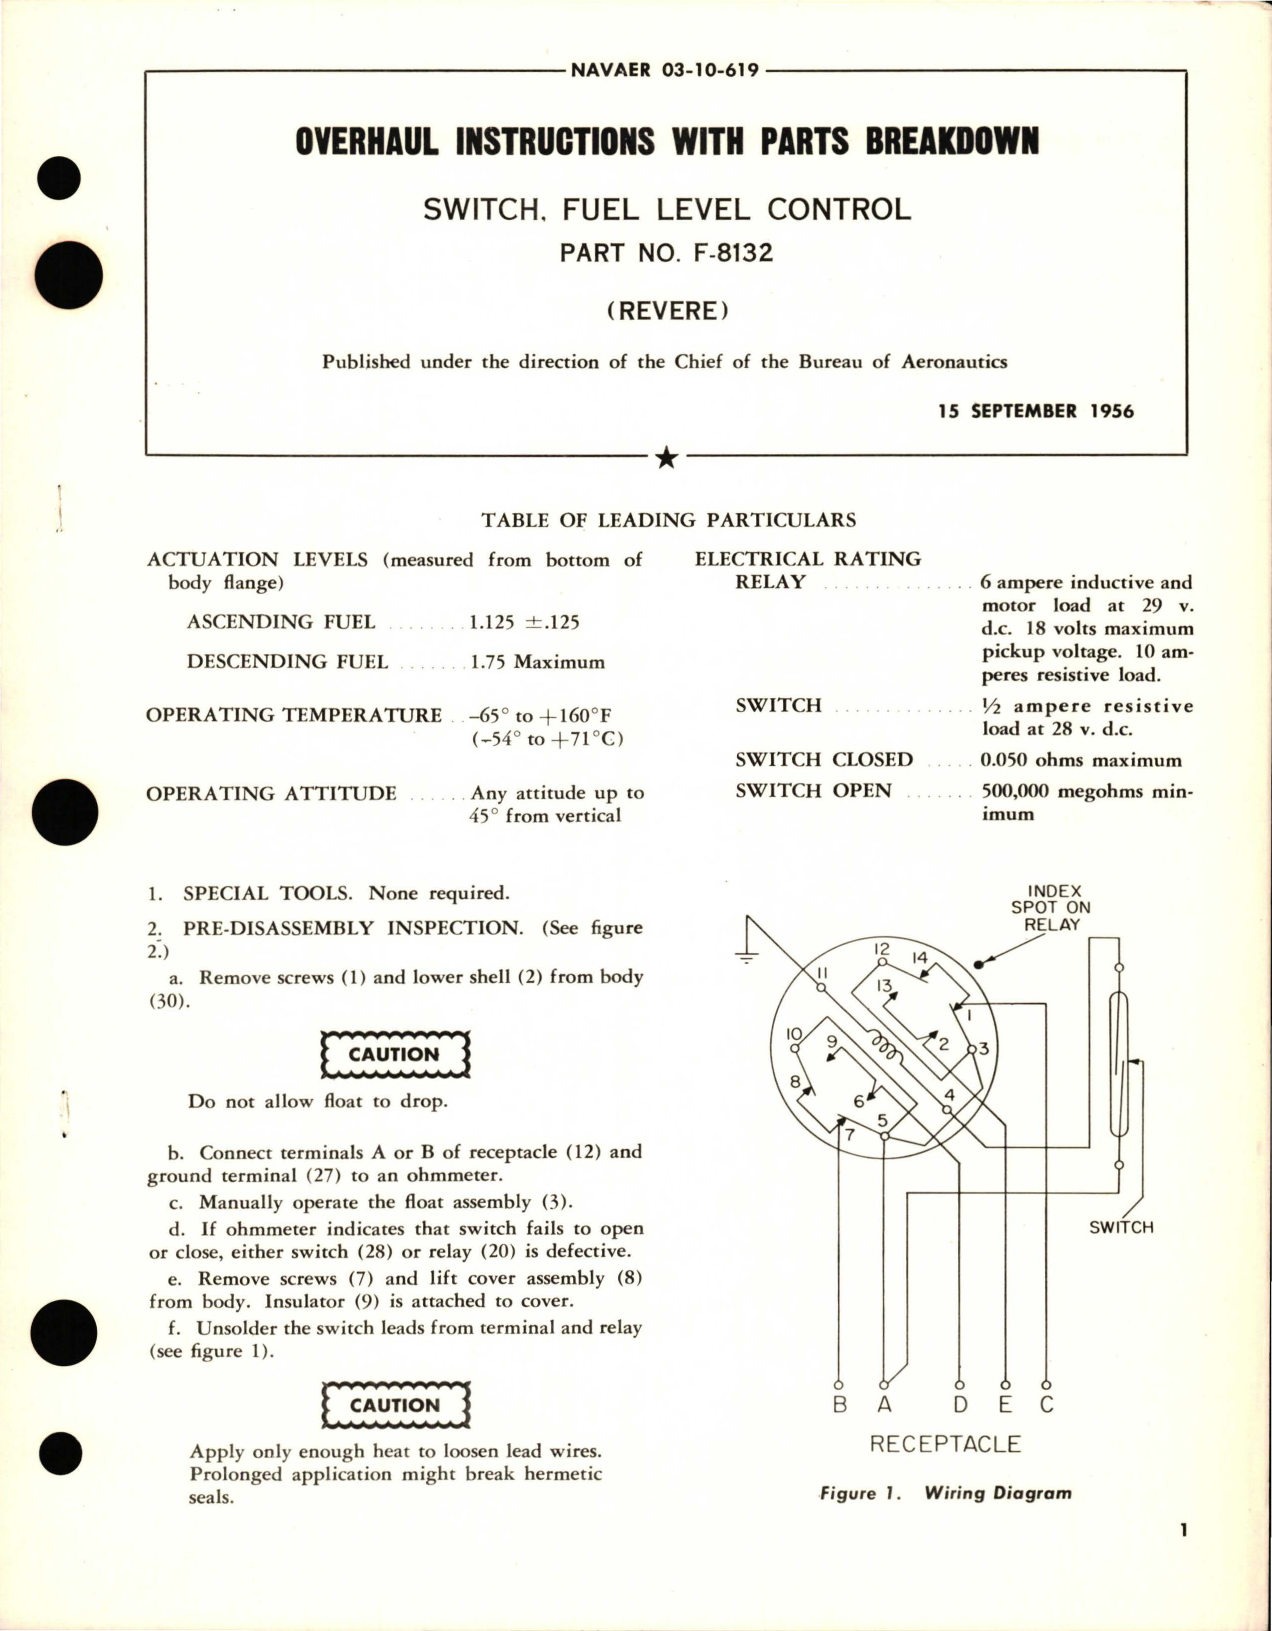 Sample page 1 from AirCorps Library document: Overhaul Instructions with Parts Breakdown for Fuel Level Control Switch - Part F-8132